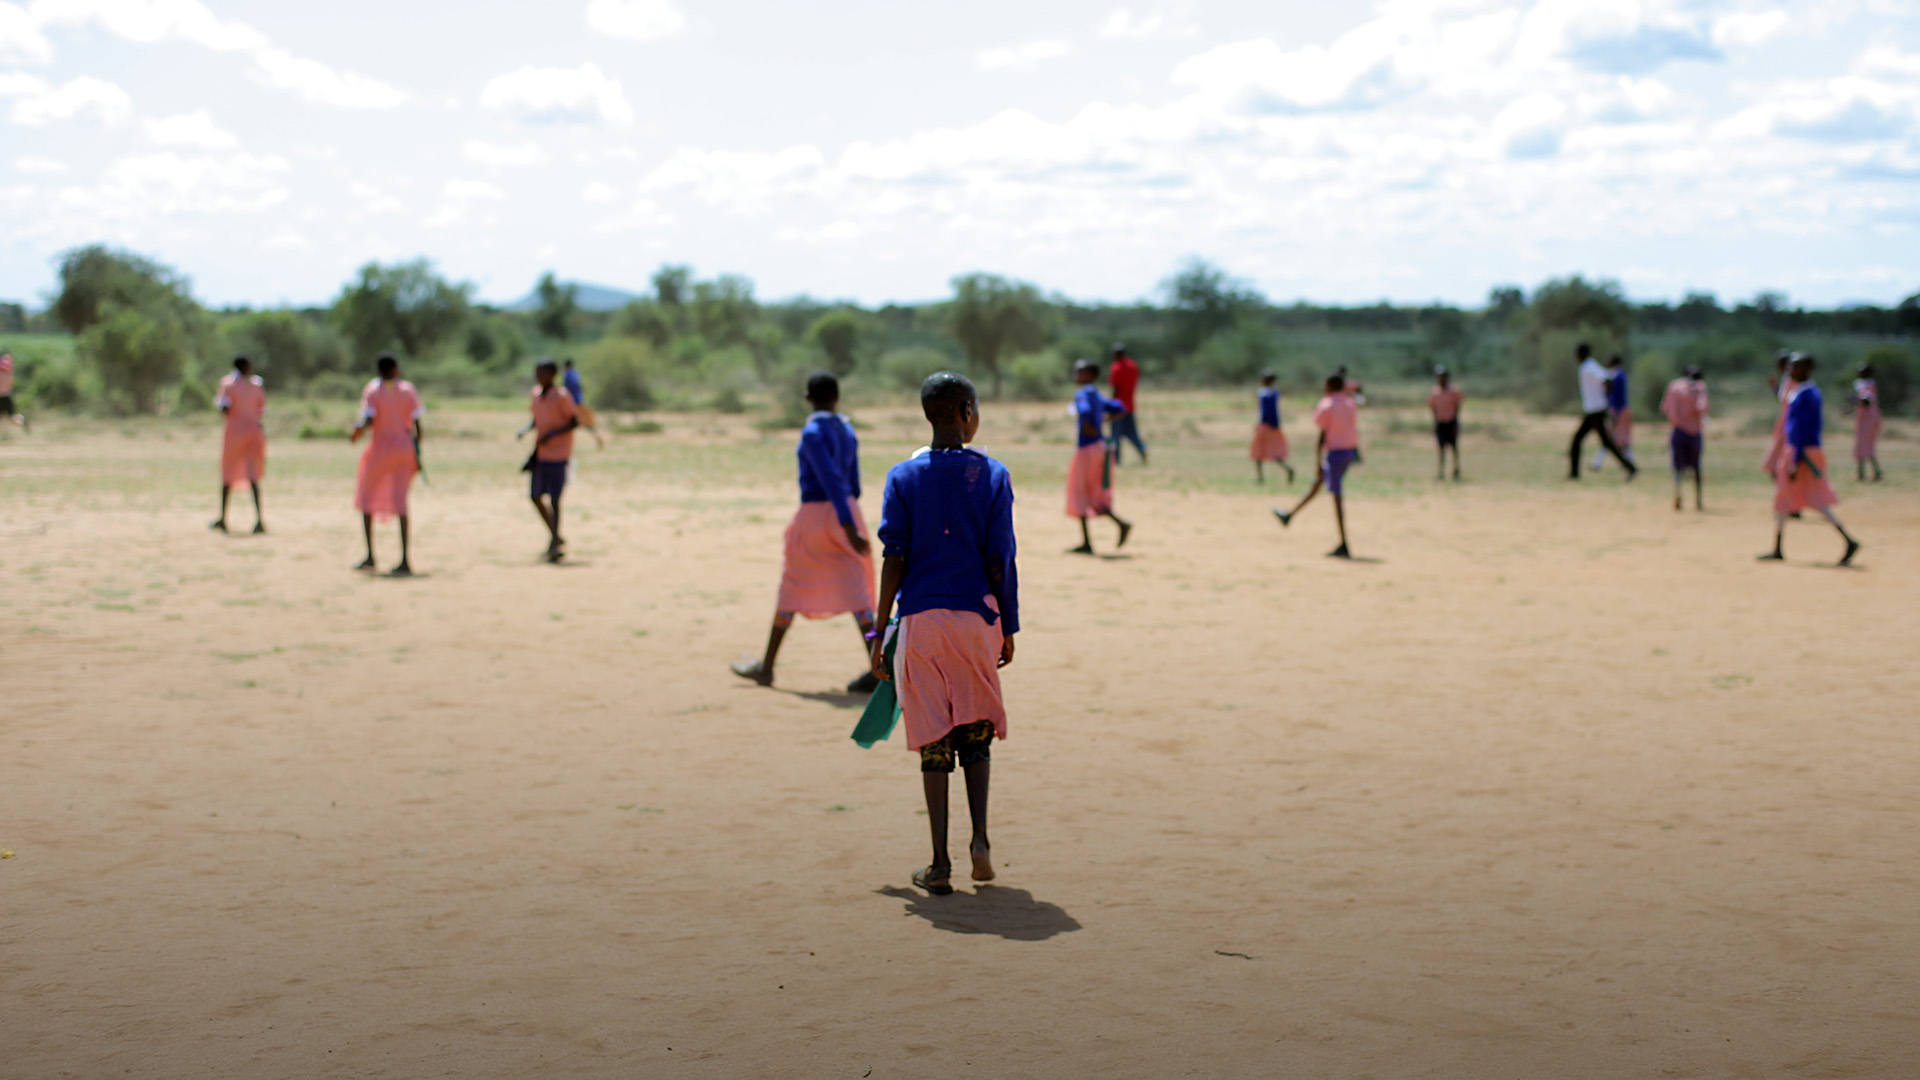 African children playing football outside together